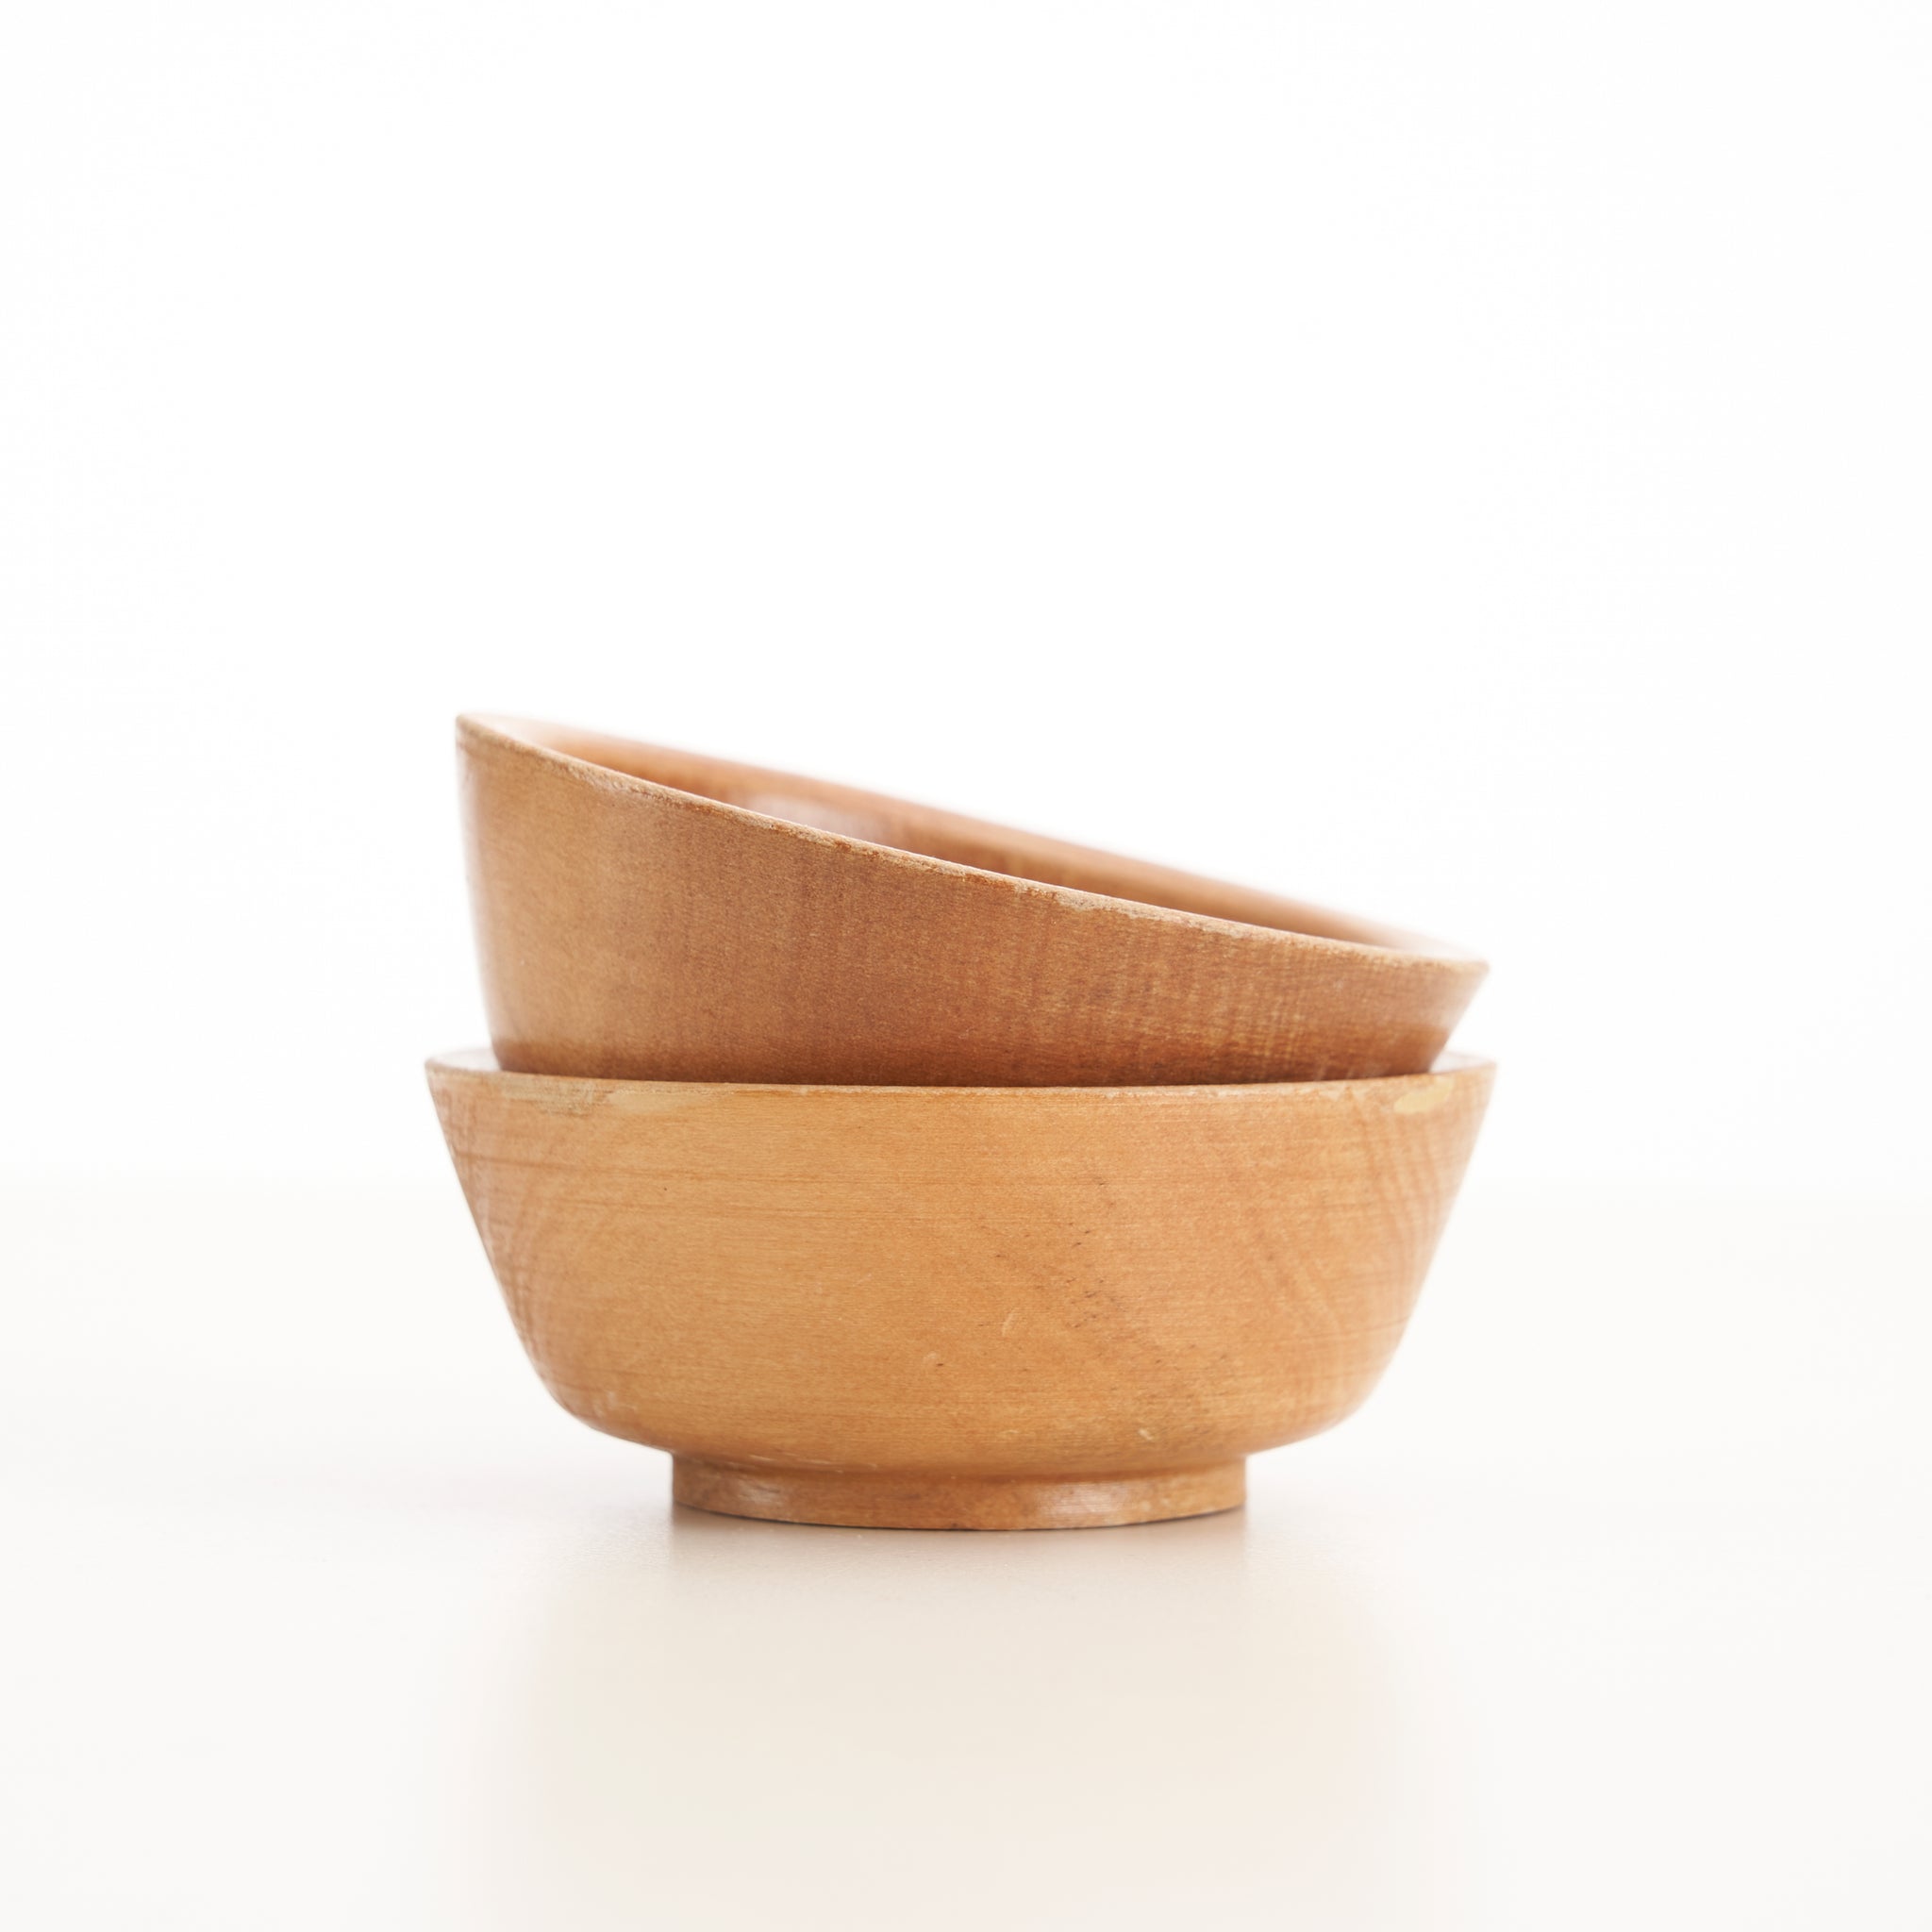 Pair of Small Wooden Bowls